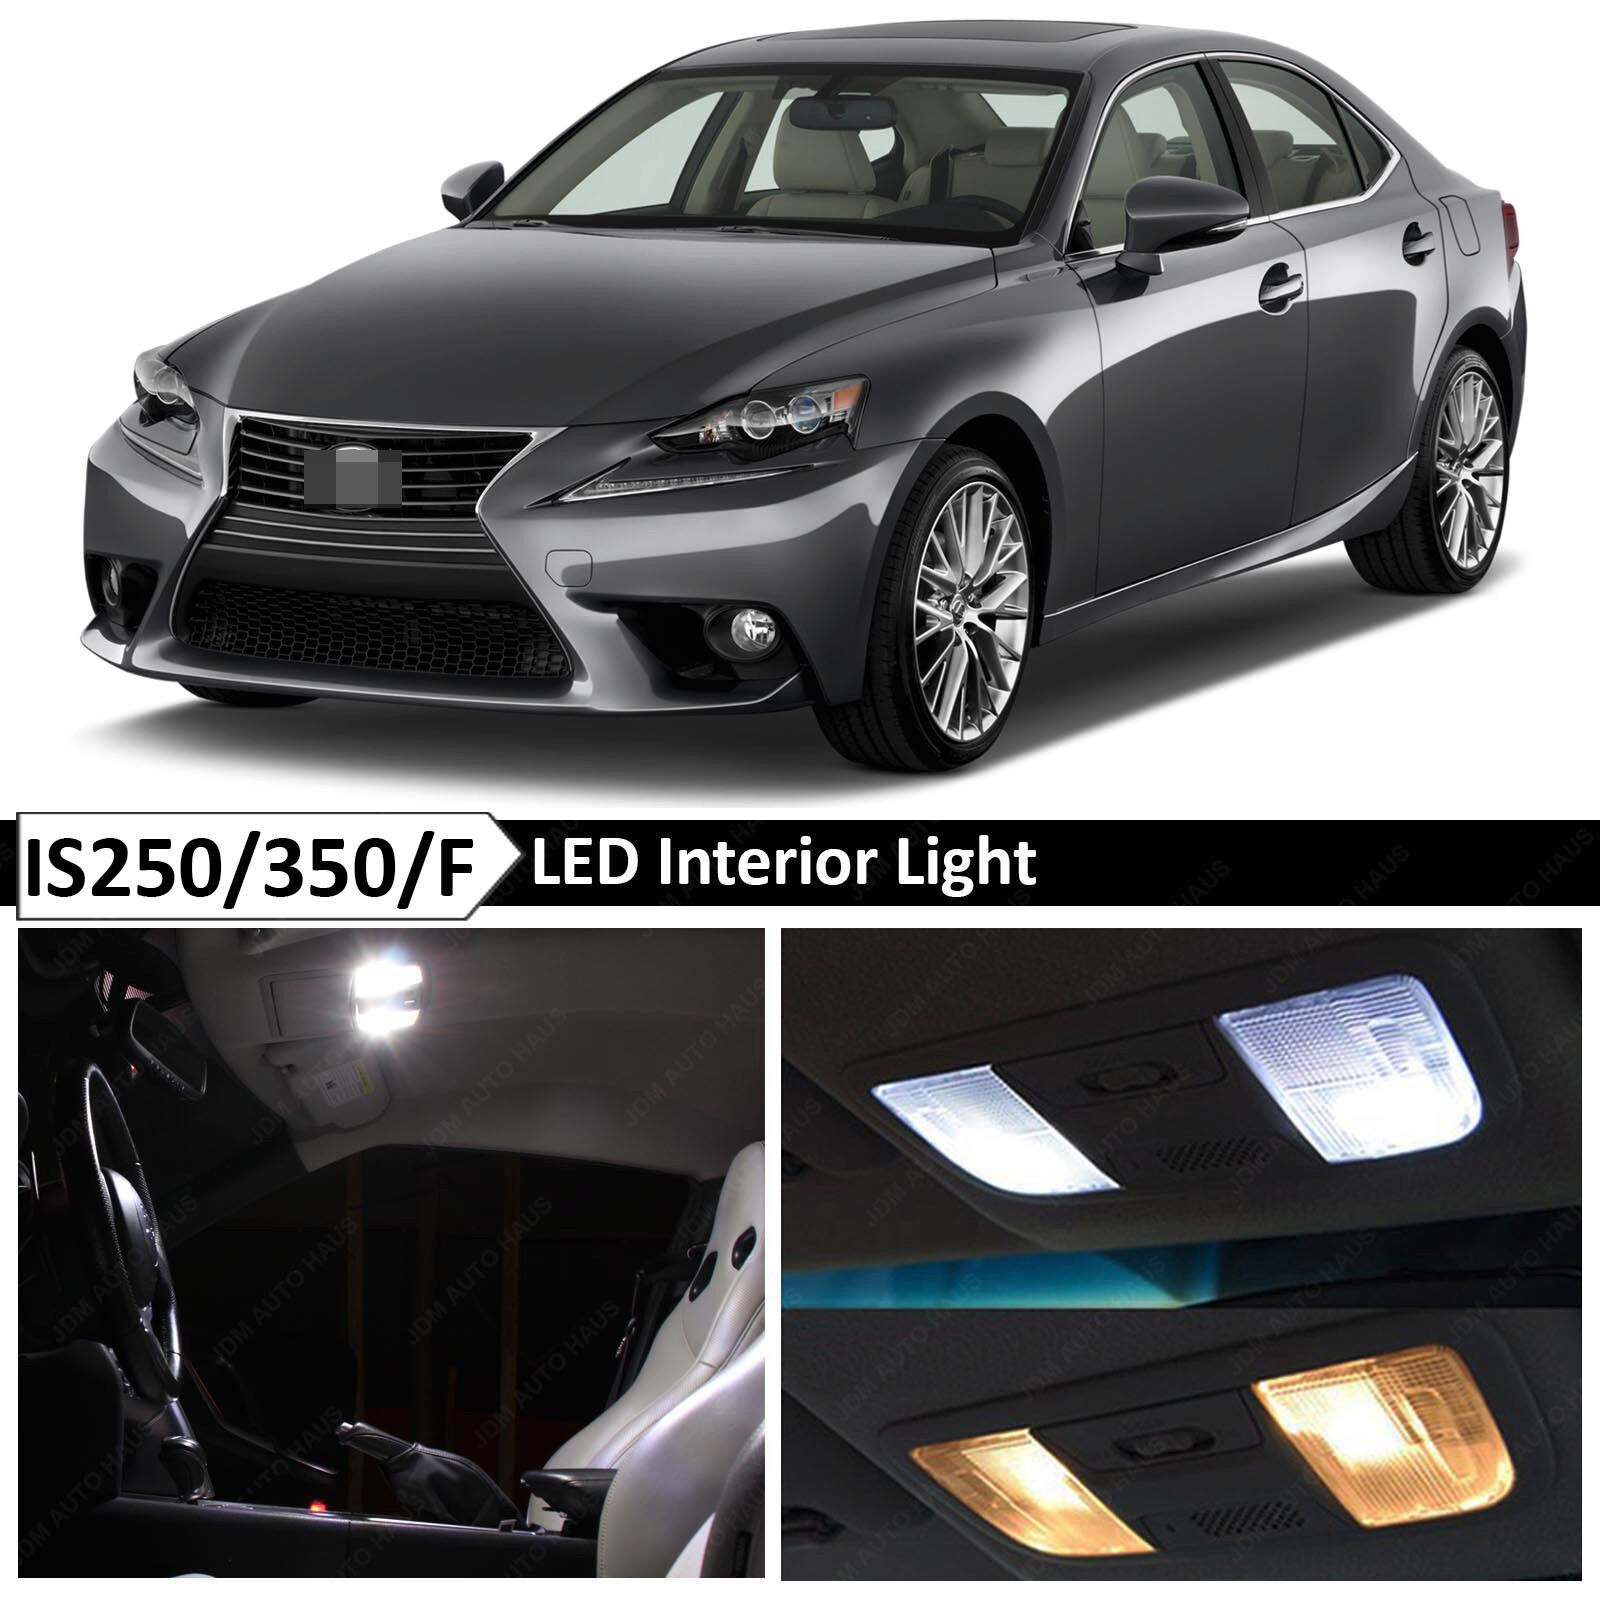 17x White Interior LED Light Package for 2014-2015 Lexus IS250 IS350 IS F